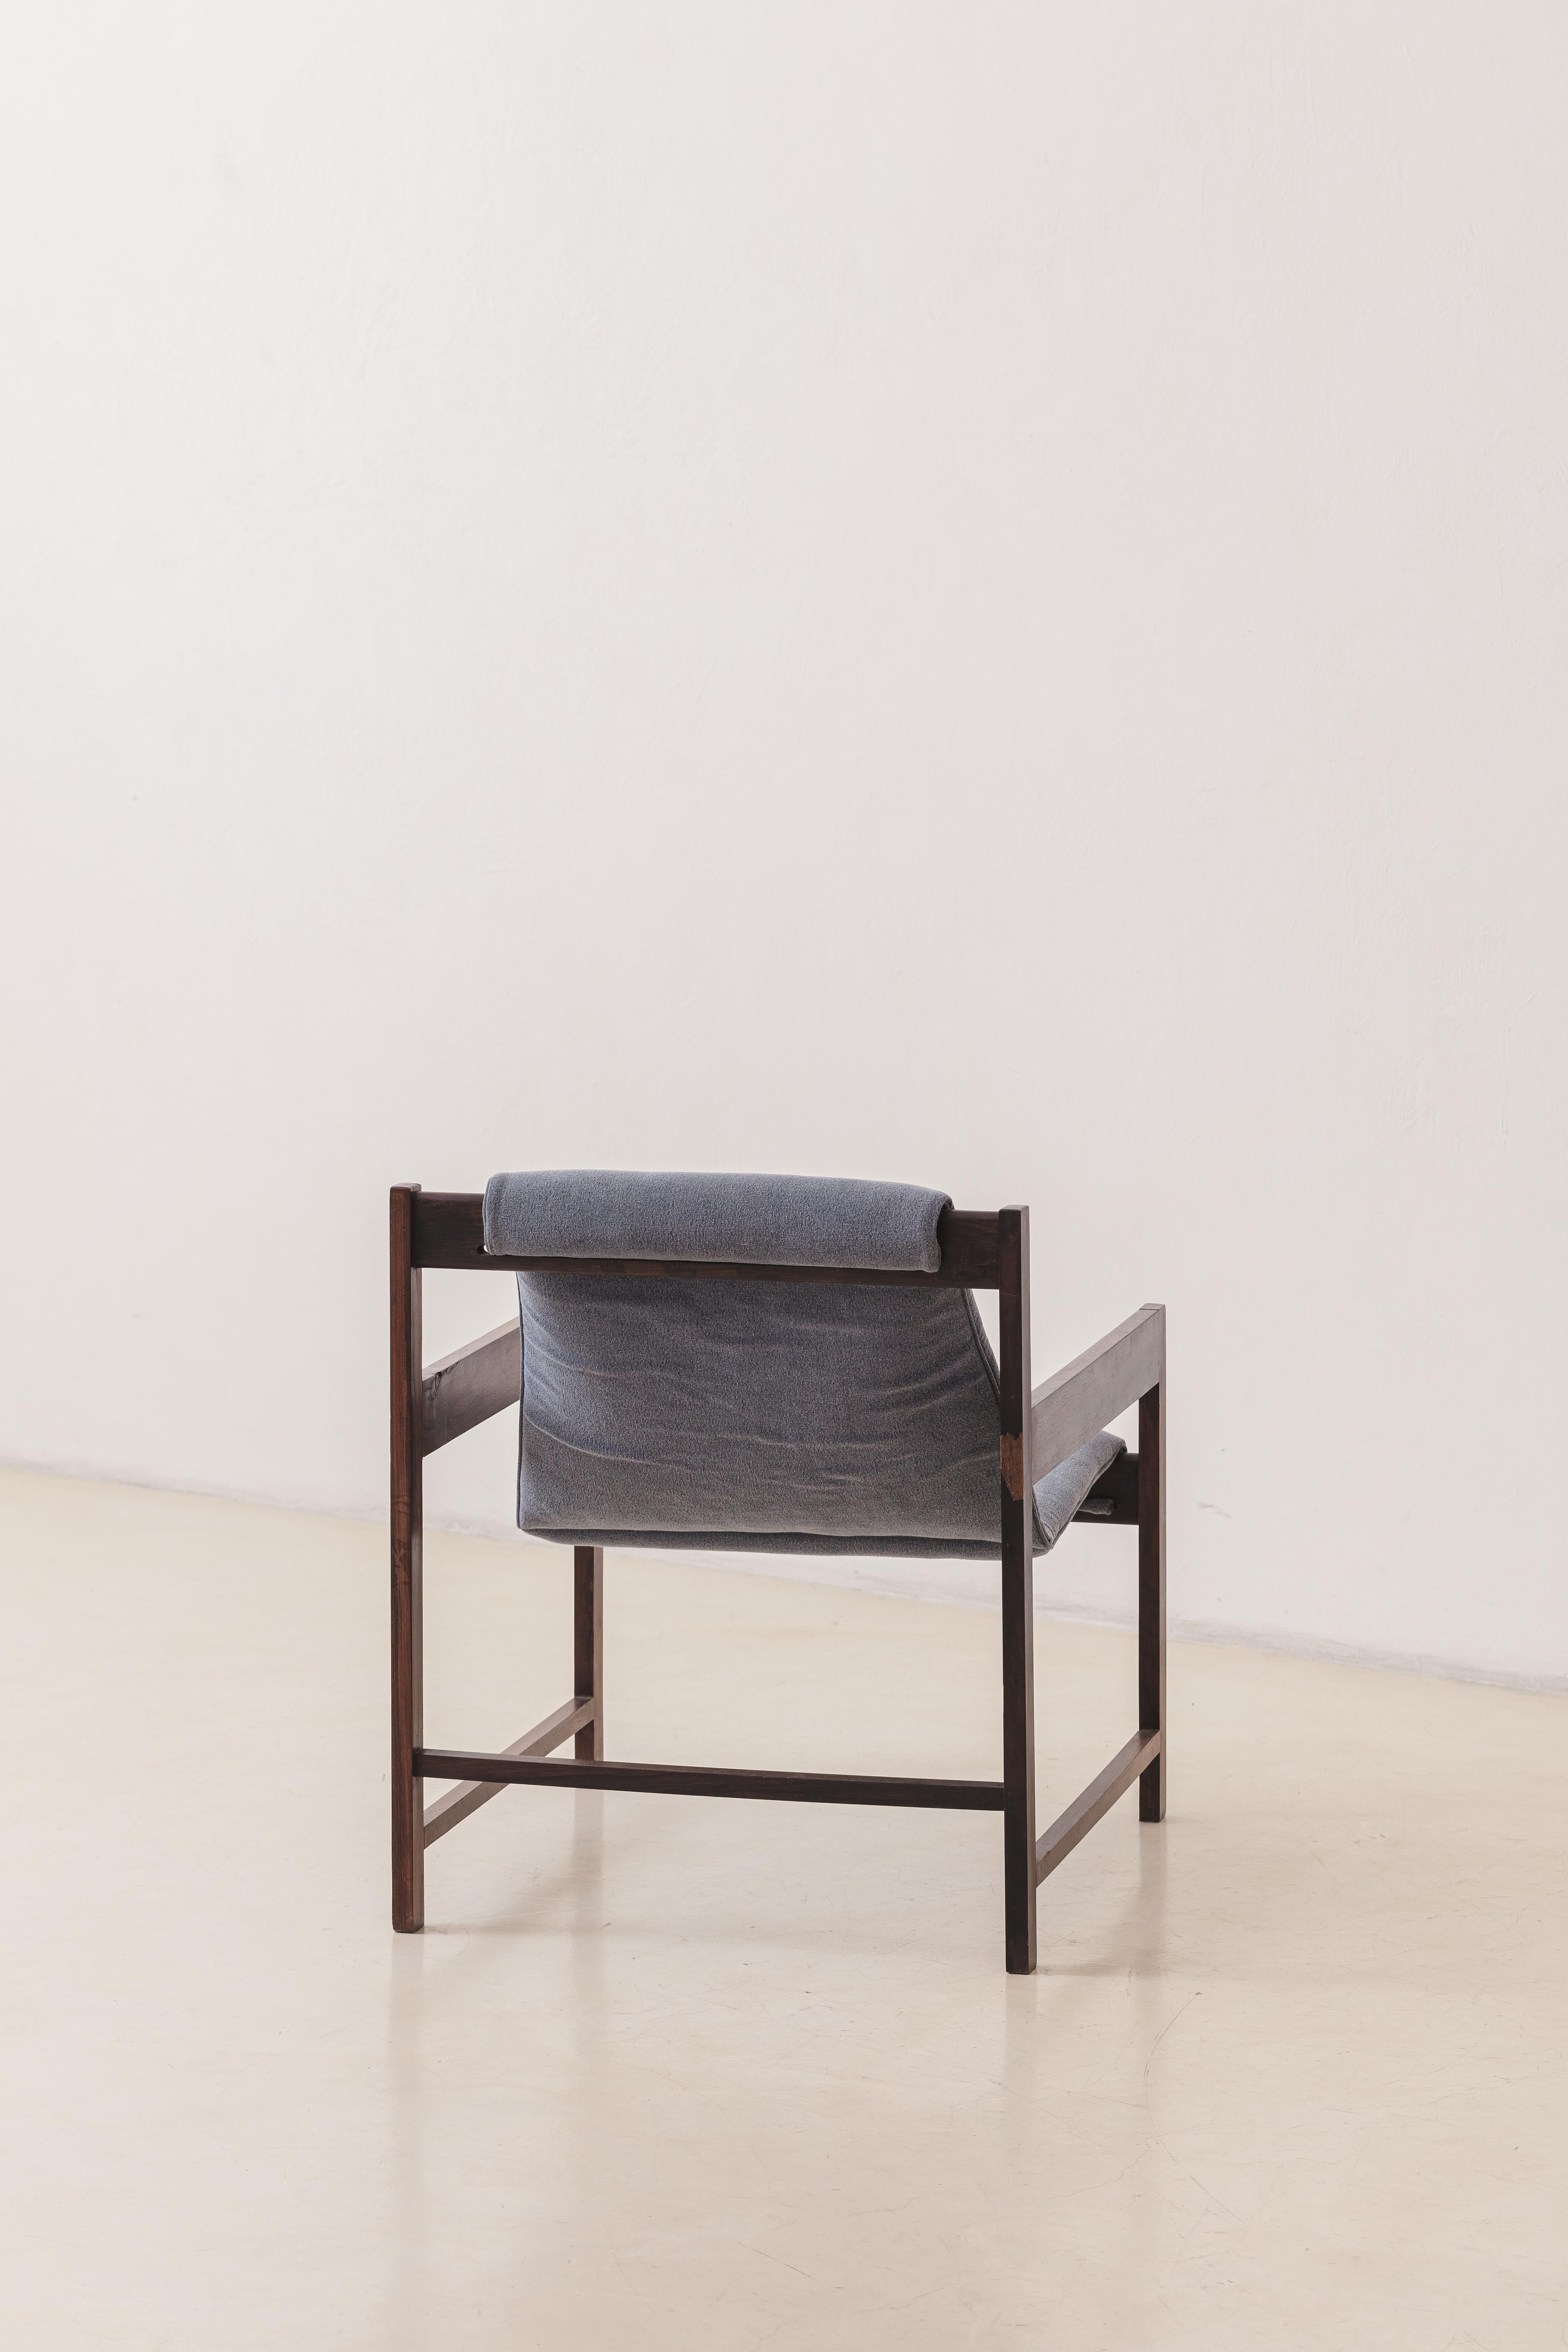 Glass Lia Armchair Design by Sergio Rodrigues, Rosewood, Mid-Century Modern, Oca 1960s For Sale